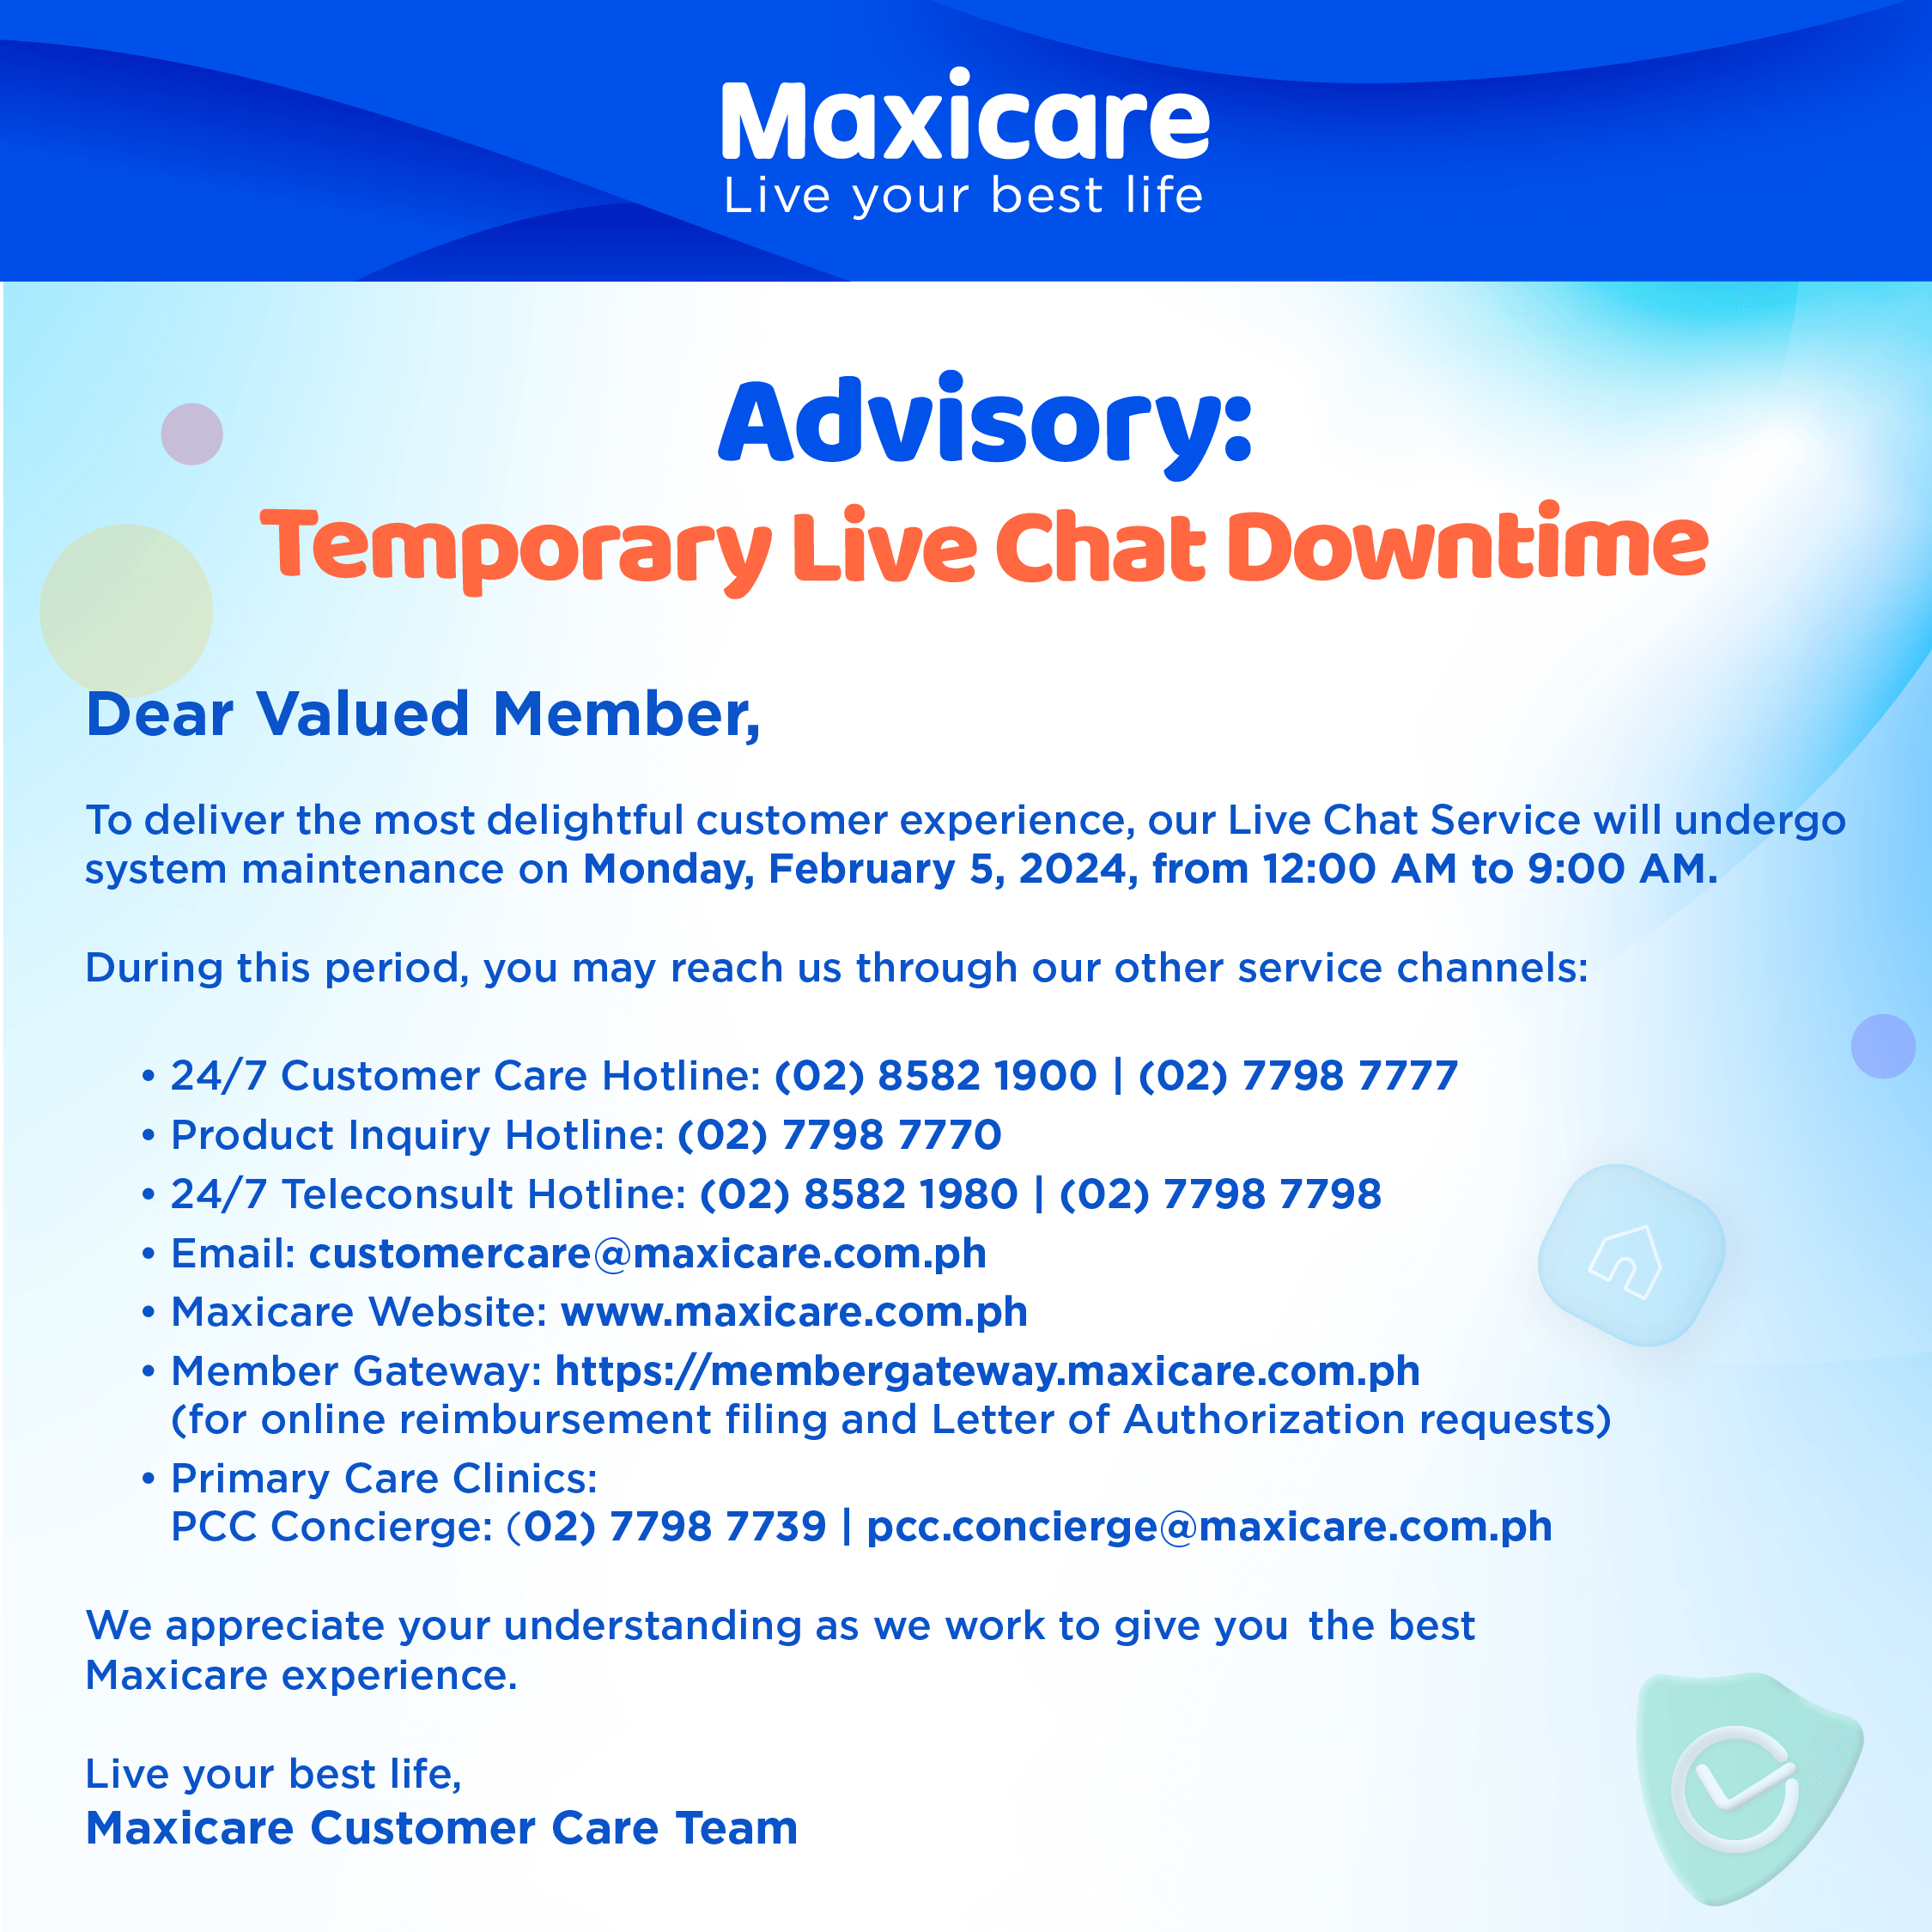 Advisory - Temporary Live Chat Downtime